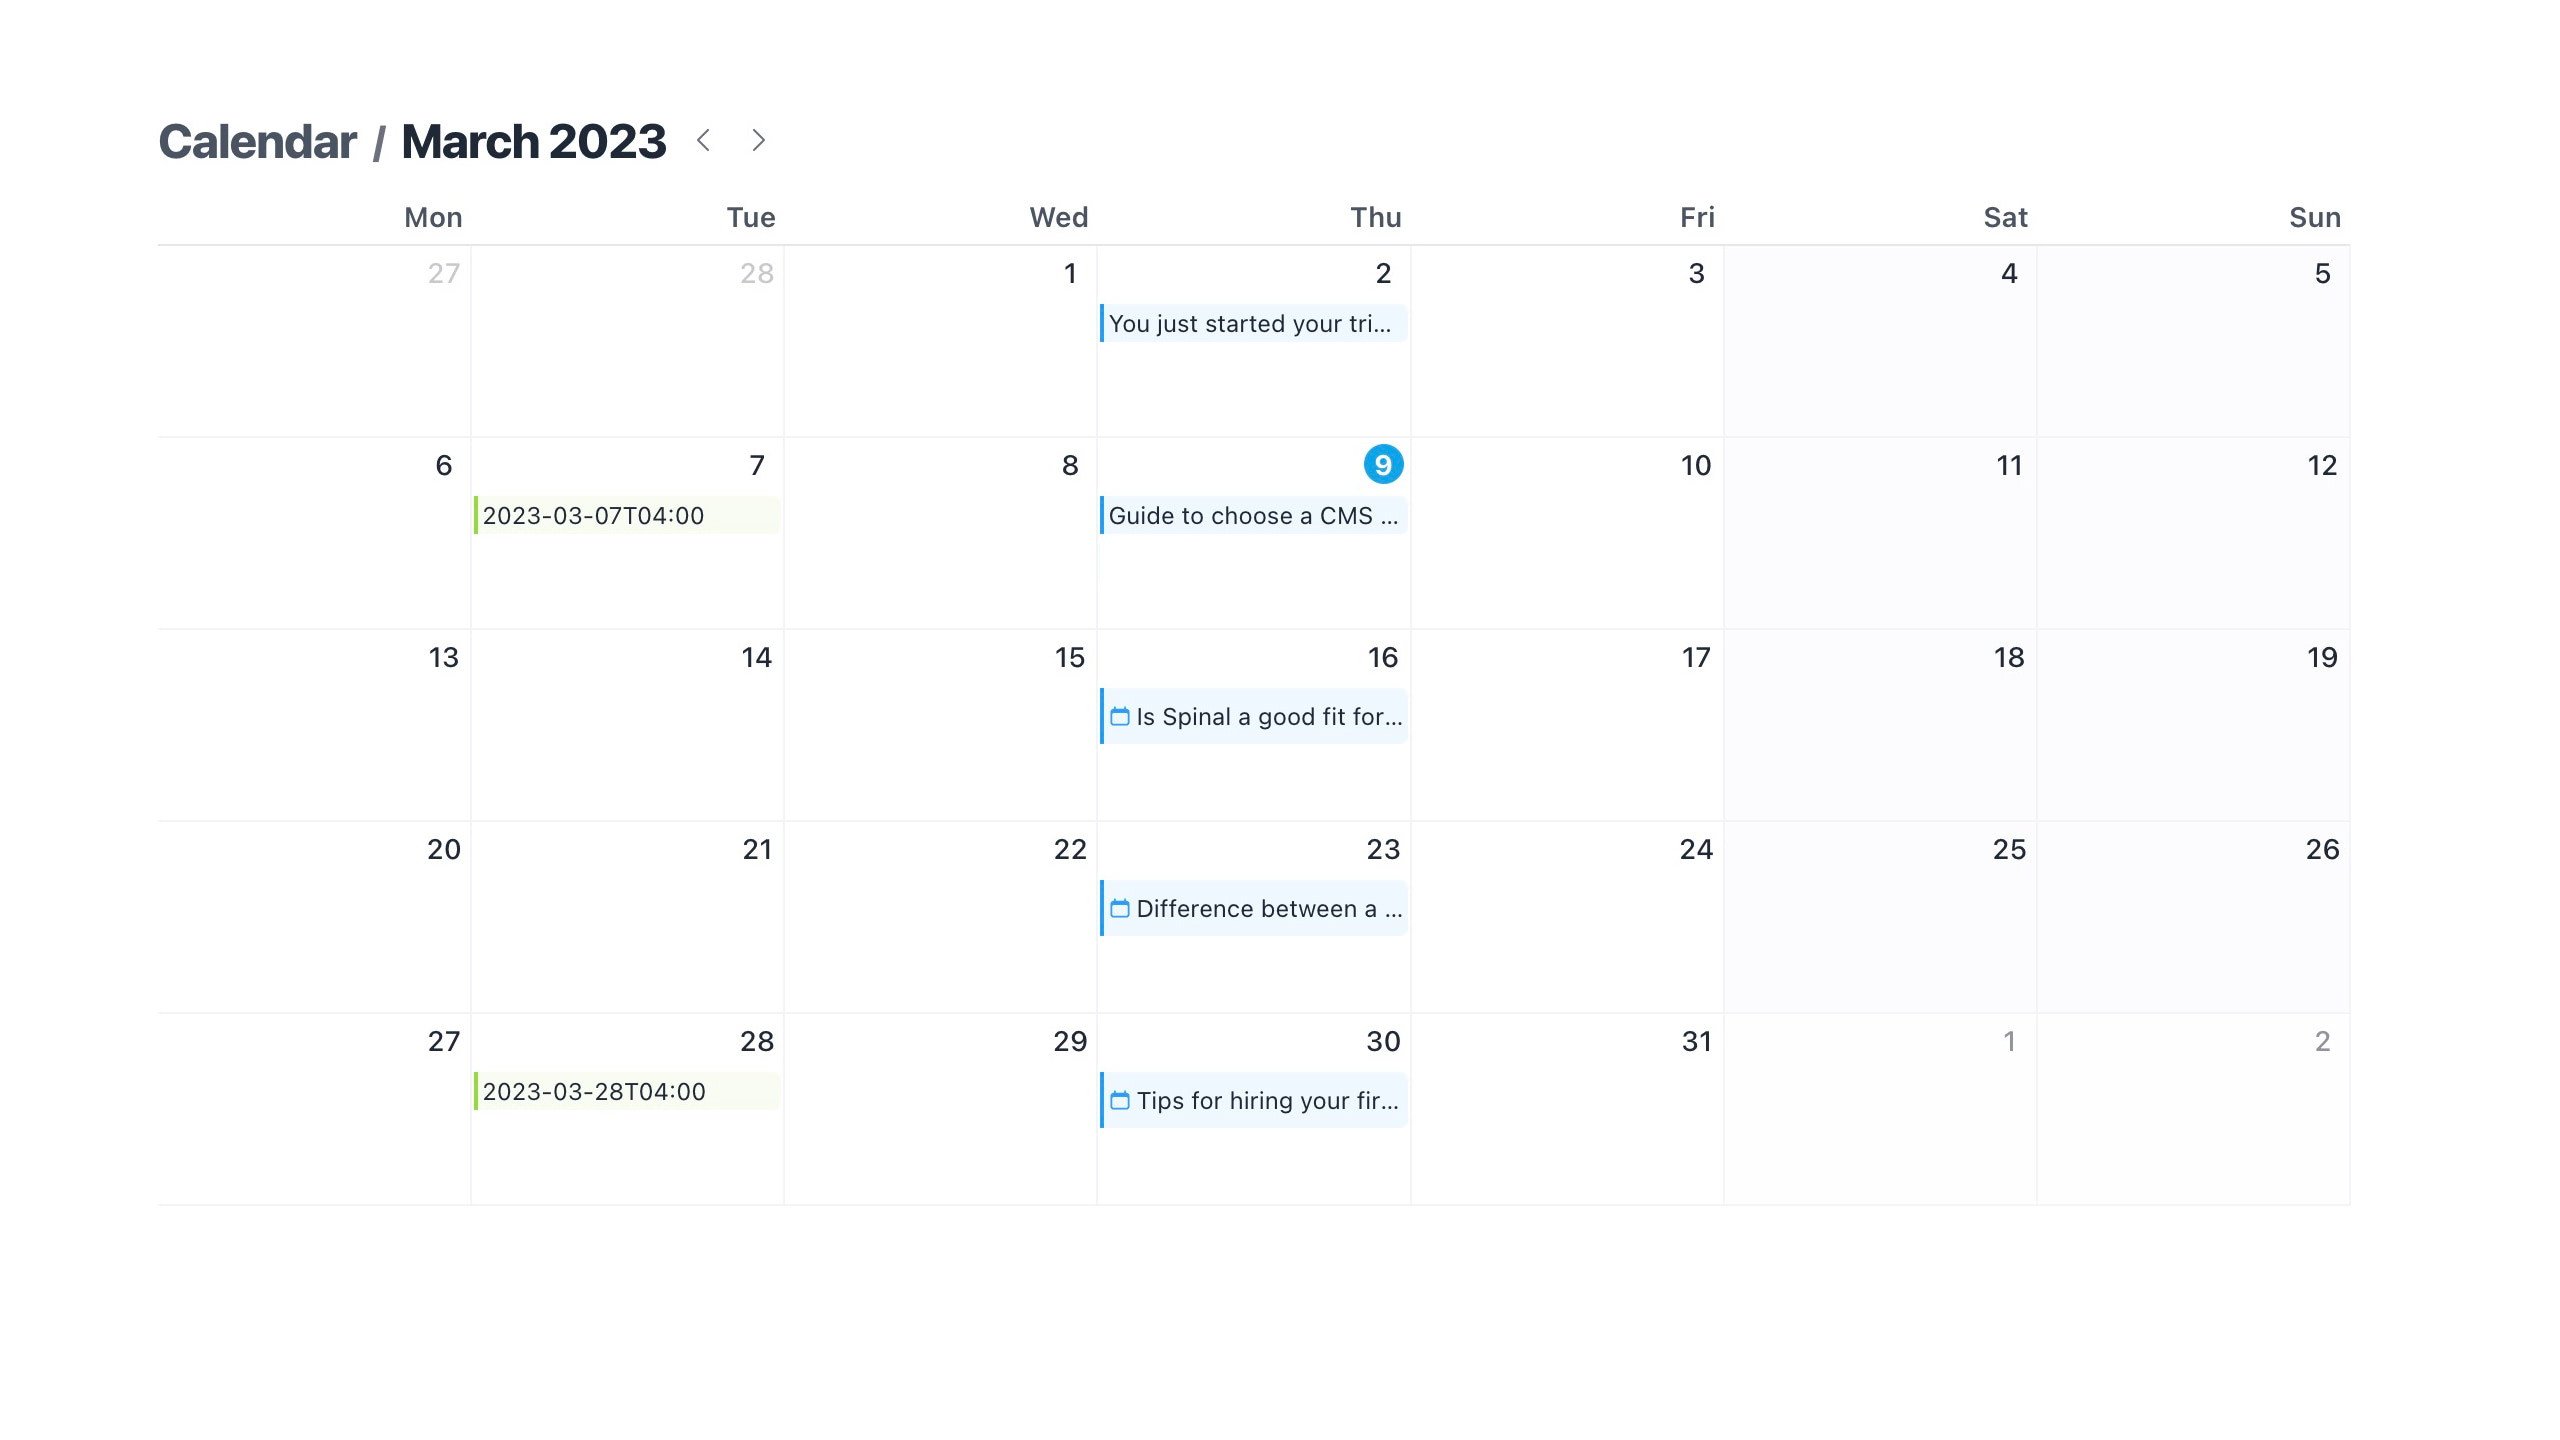 The calendar view showing various content being published and scheduled to be published in the future